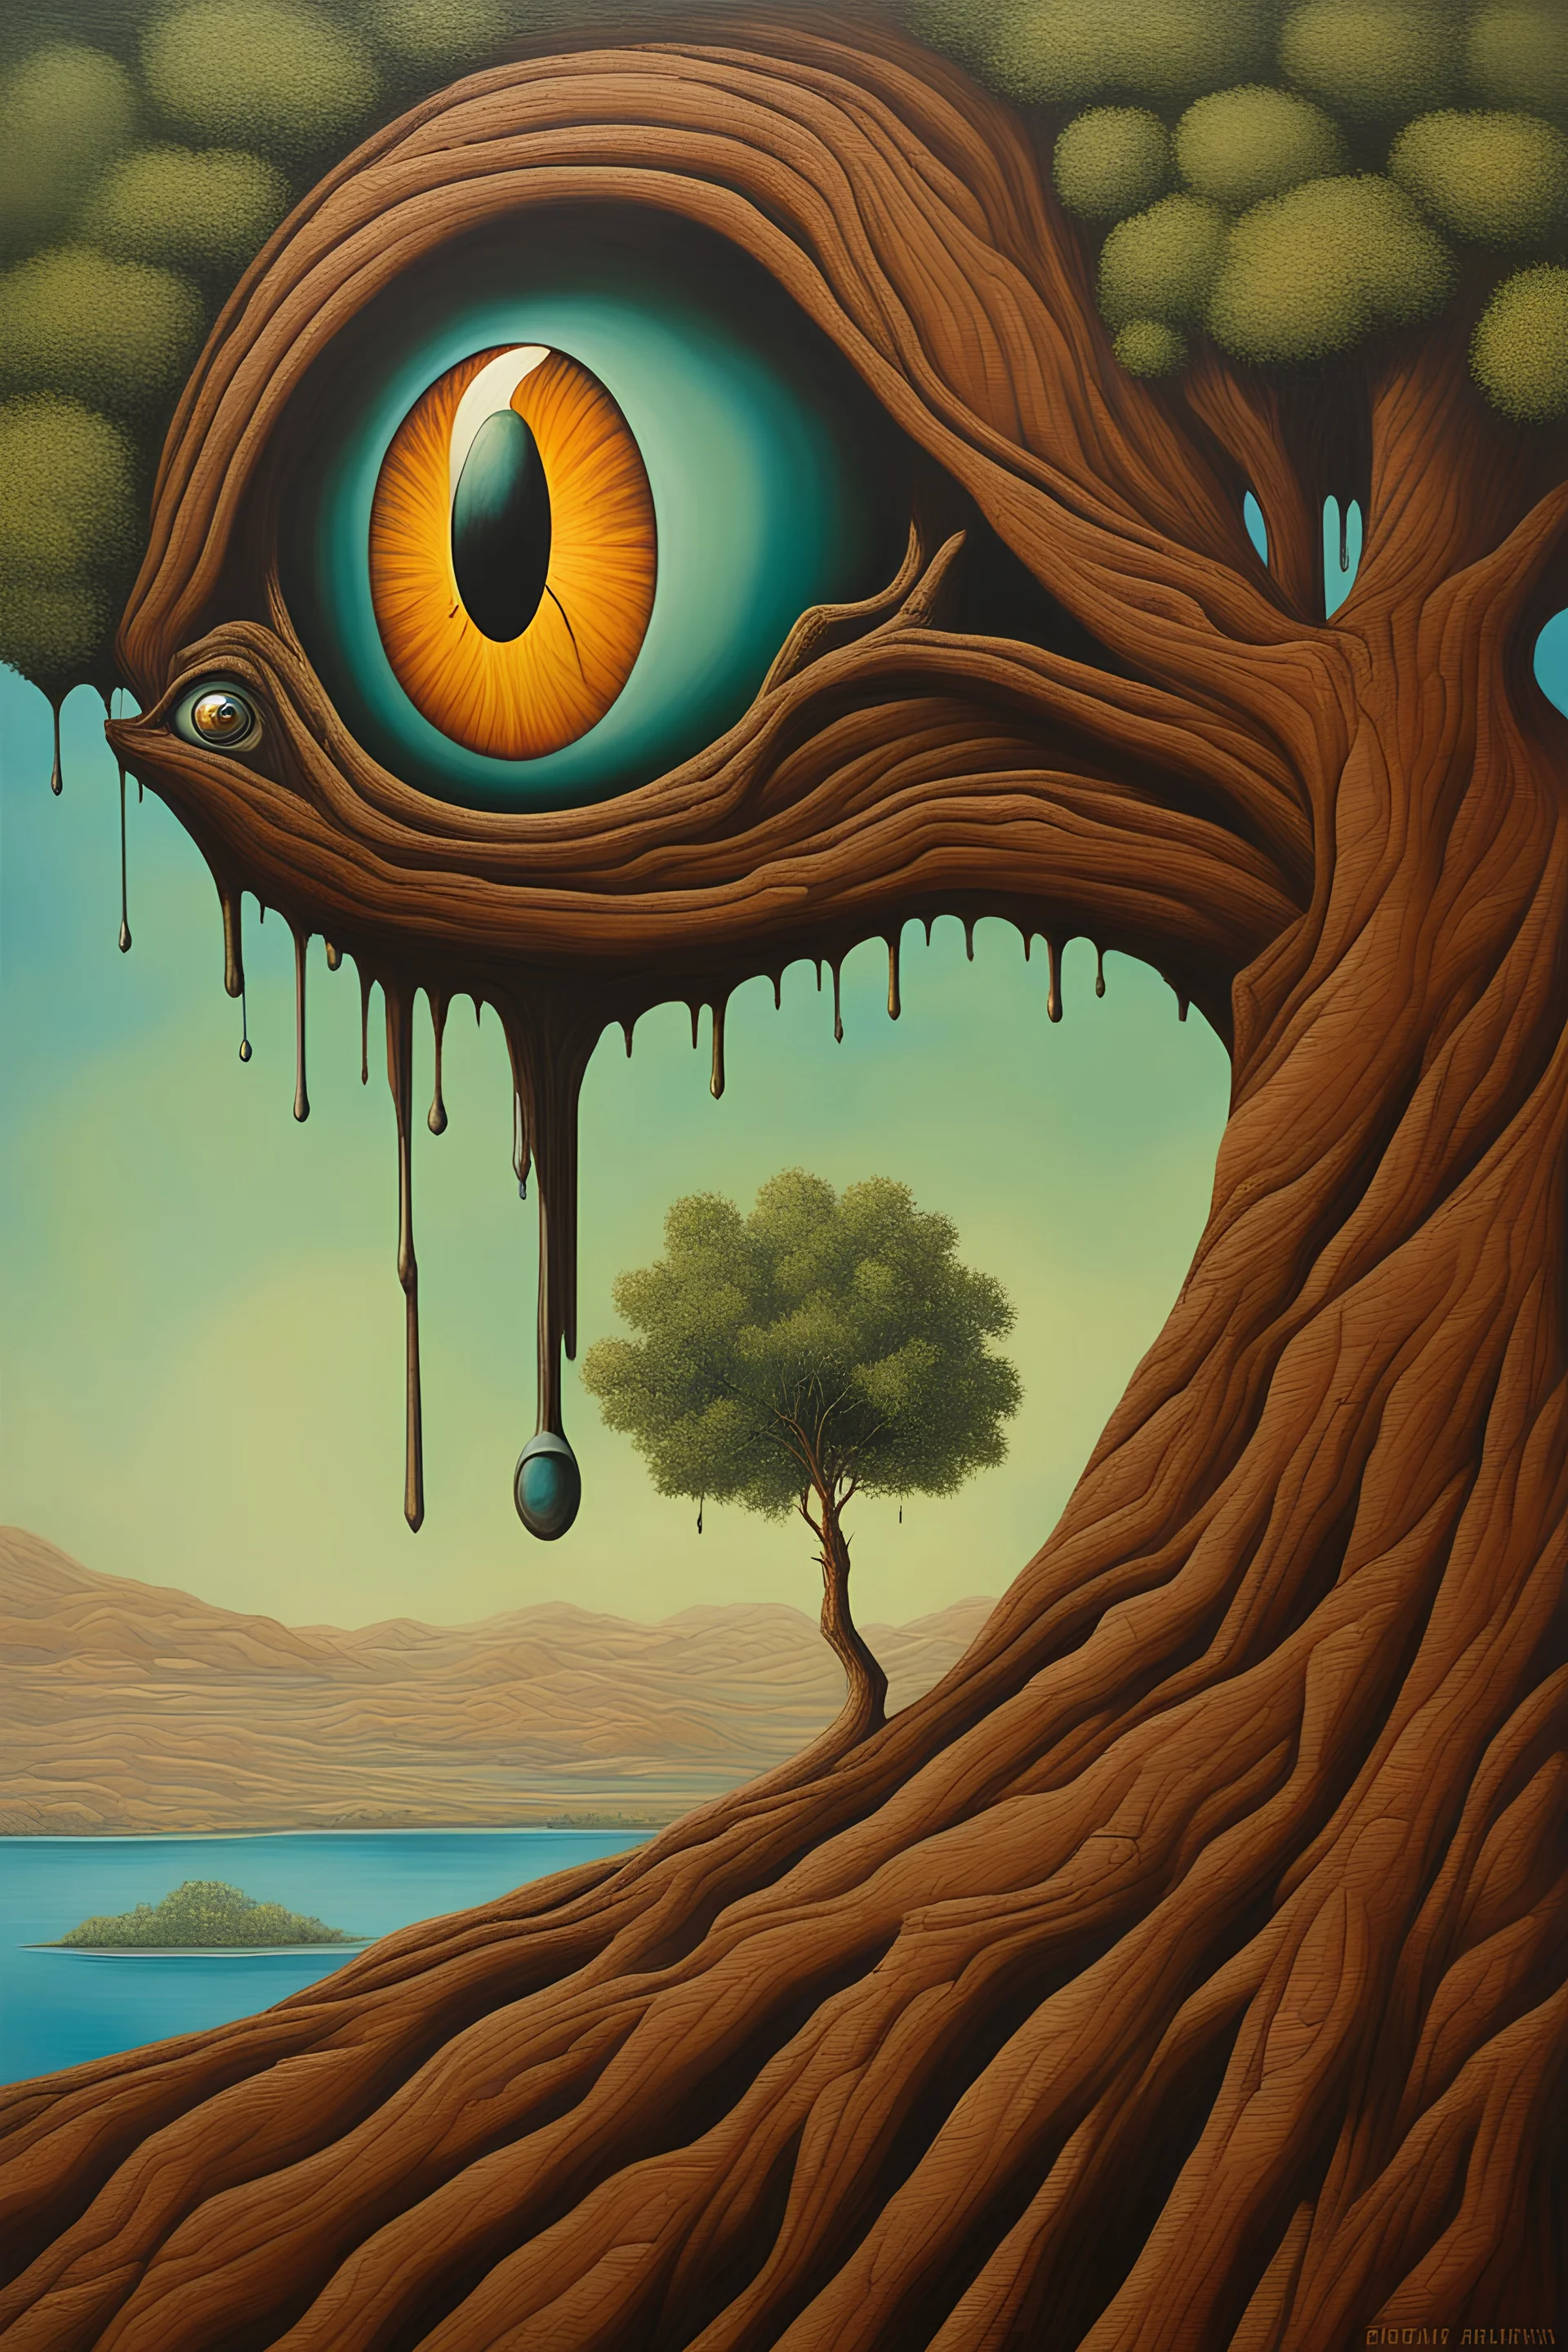 an eye in a tree near water, in the style of brian despain, dripping paint, expansive landscapes, highly detailed, surrealistic urban scenes, mars ravelo, mati klarwein